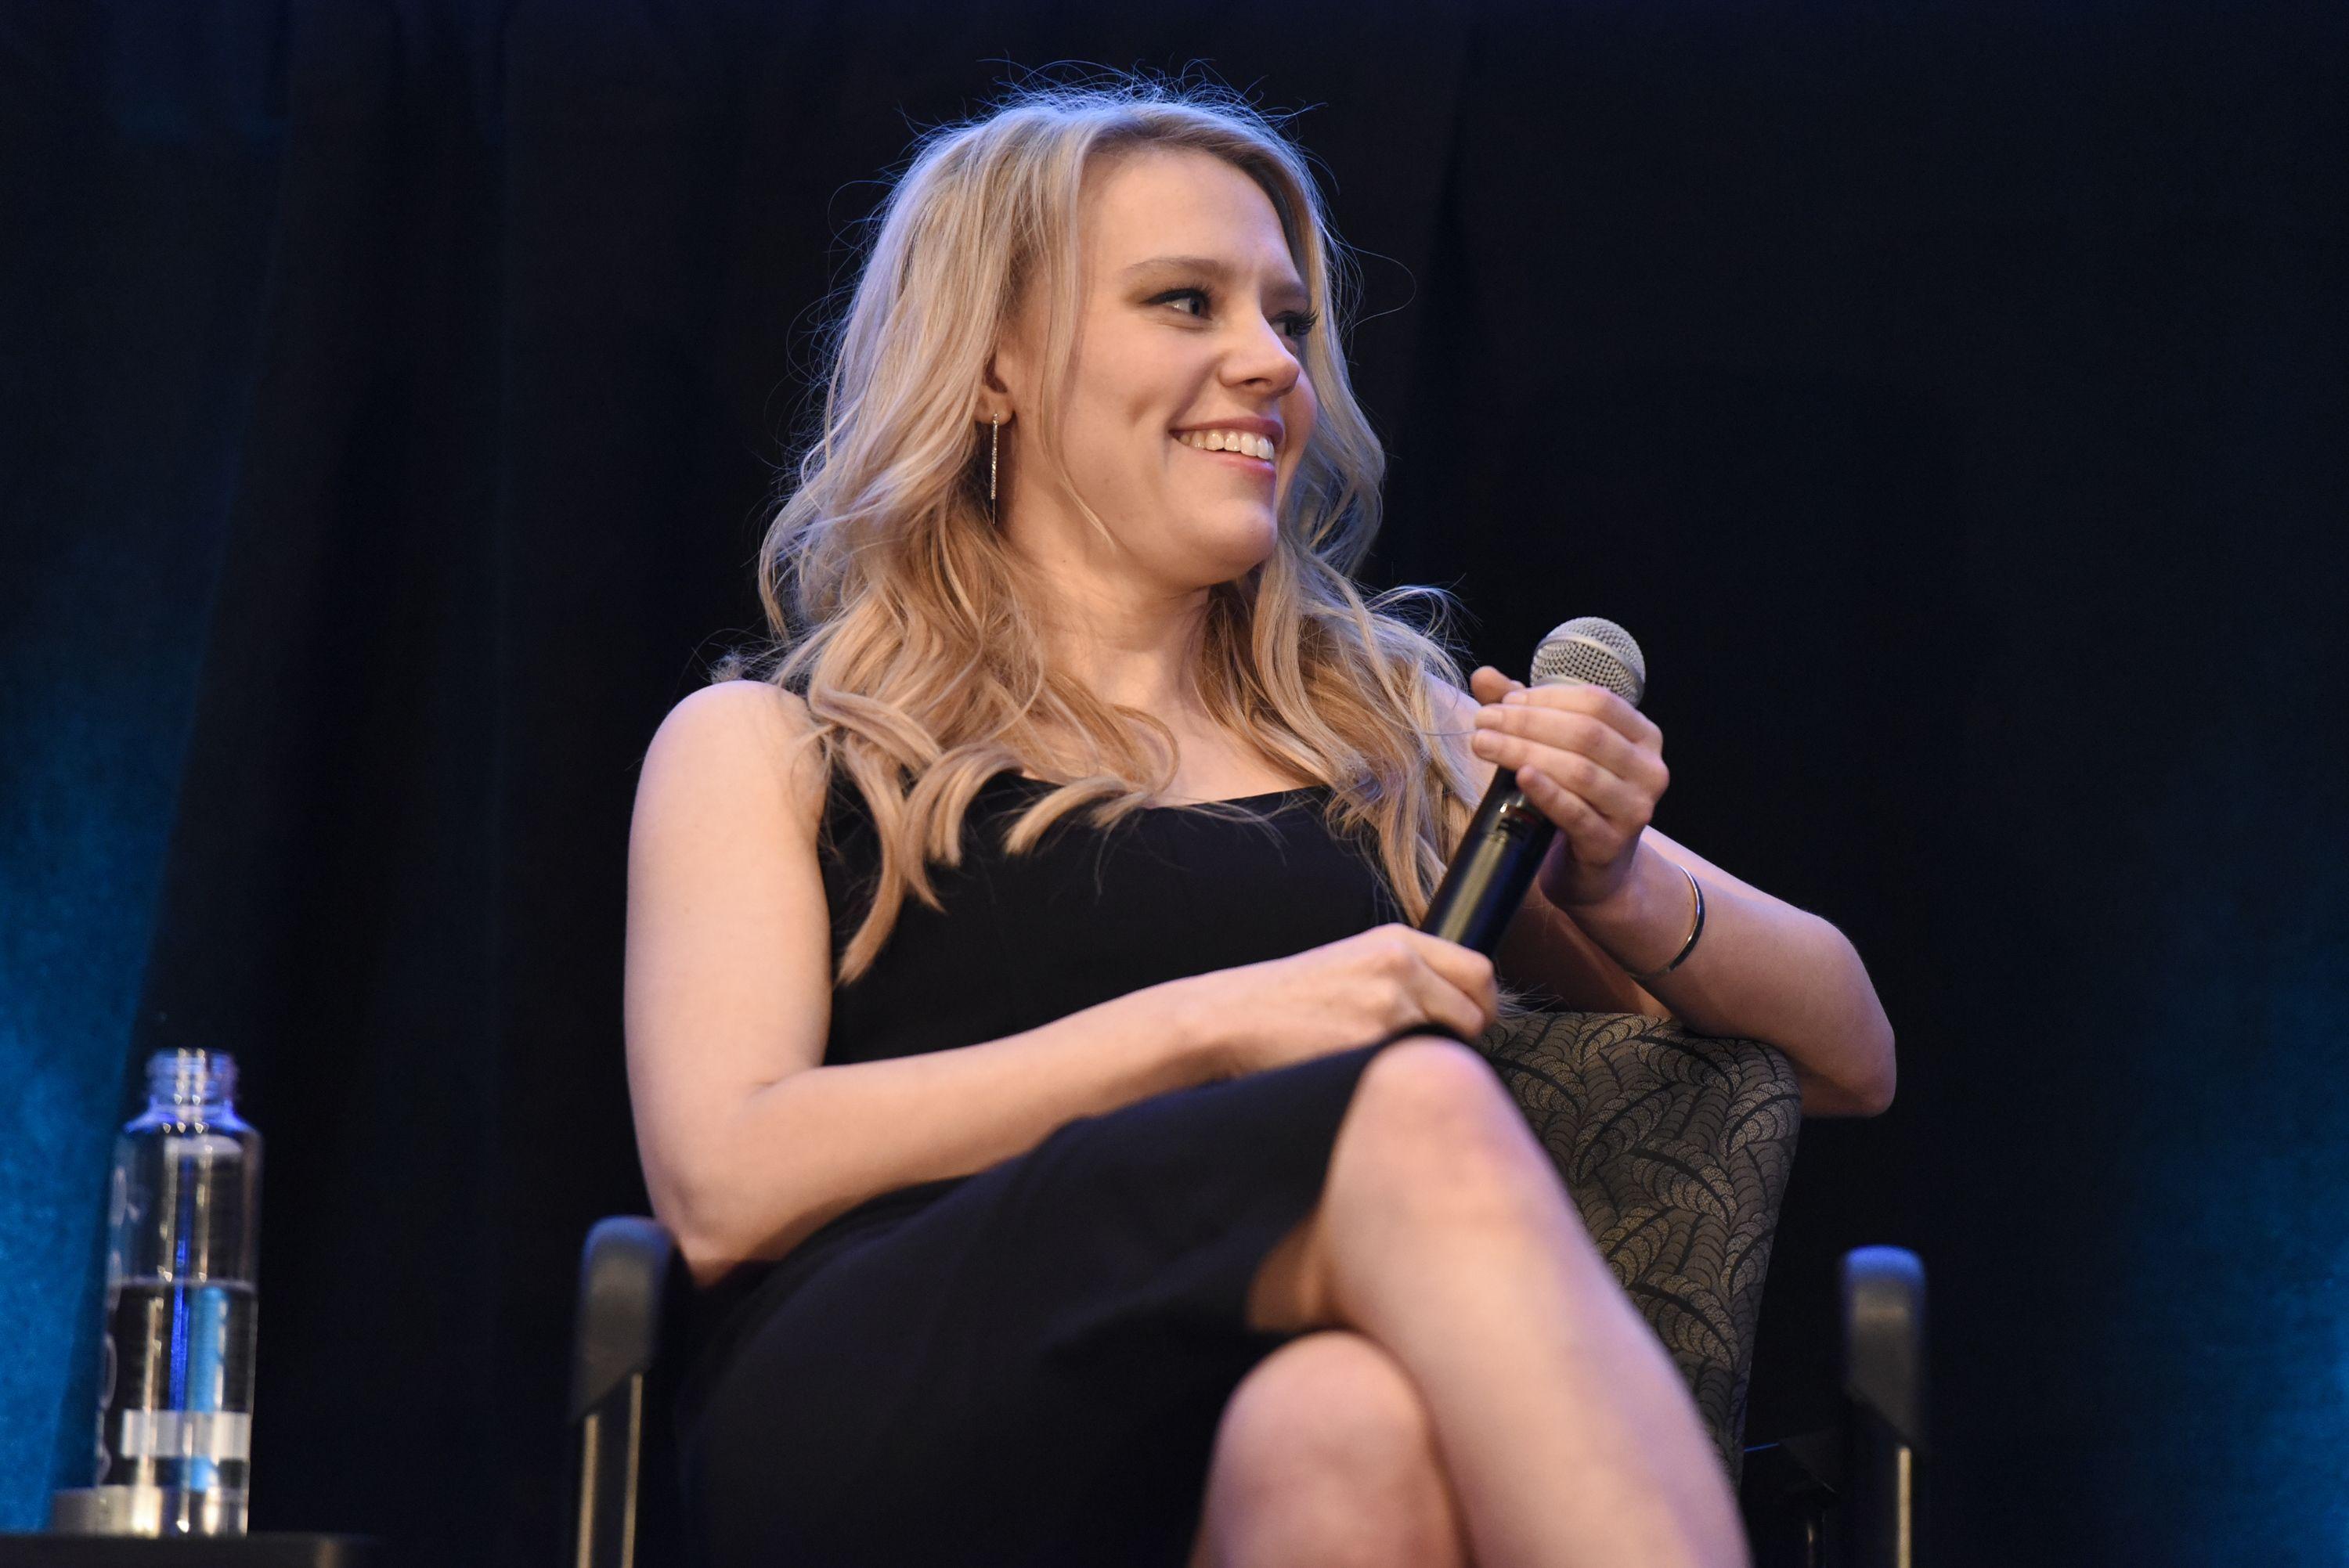 New 'Ghostbusters' Costume Details From Kate McKinnon Give More